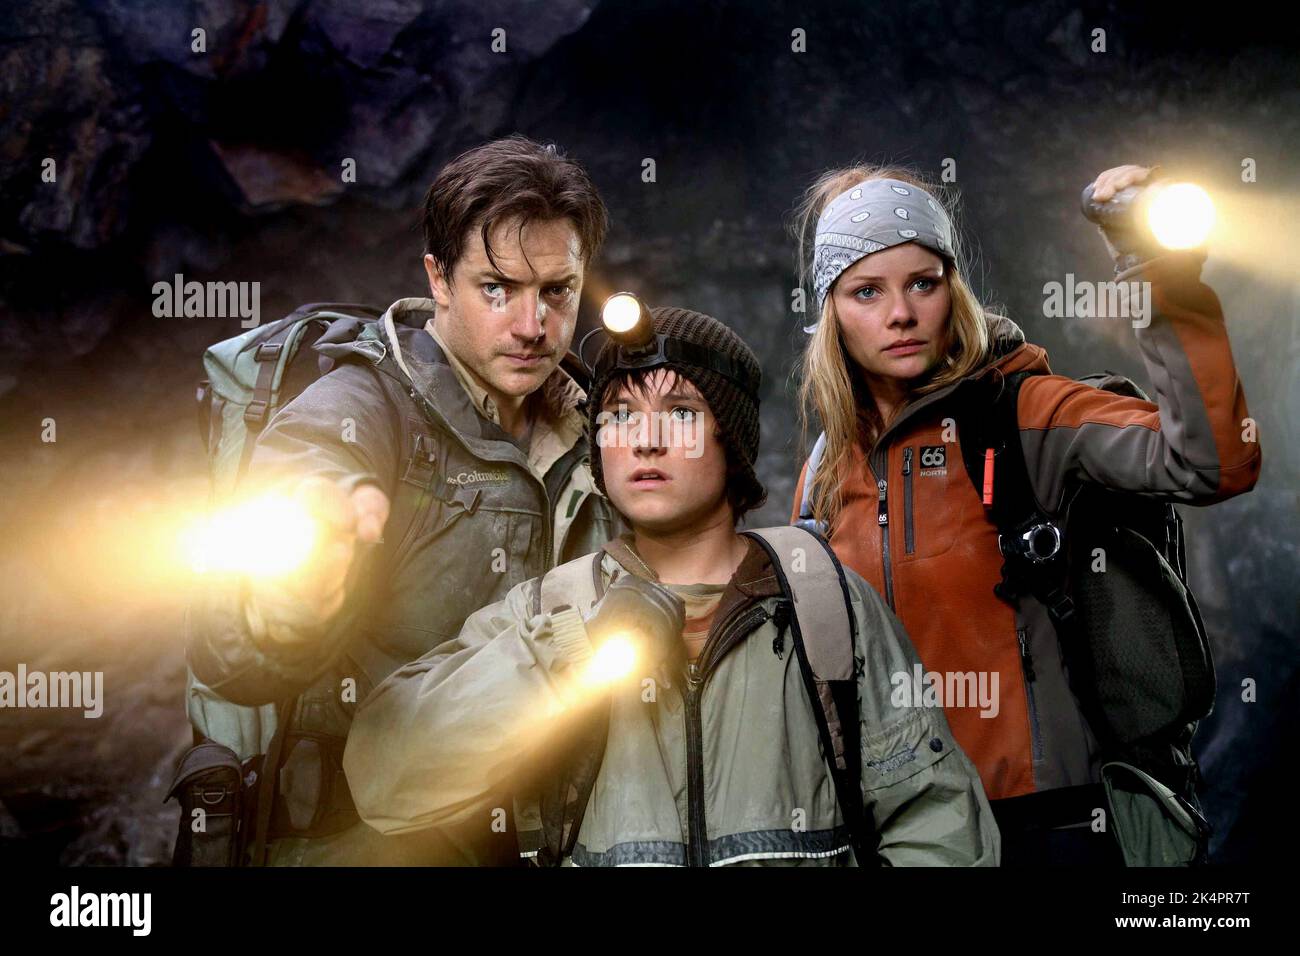 FRASER,HUTCHERSON,BRIEM, JOURNEY TO THE CENTER OF THE EARTH, 2008 Stock Photo